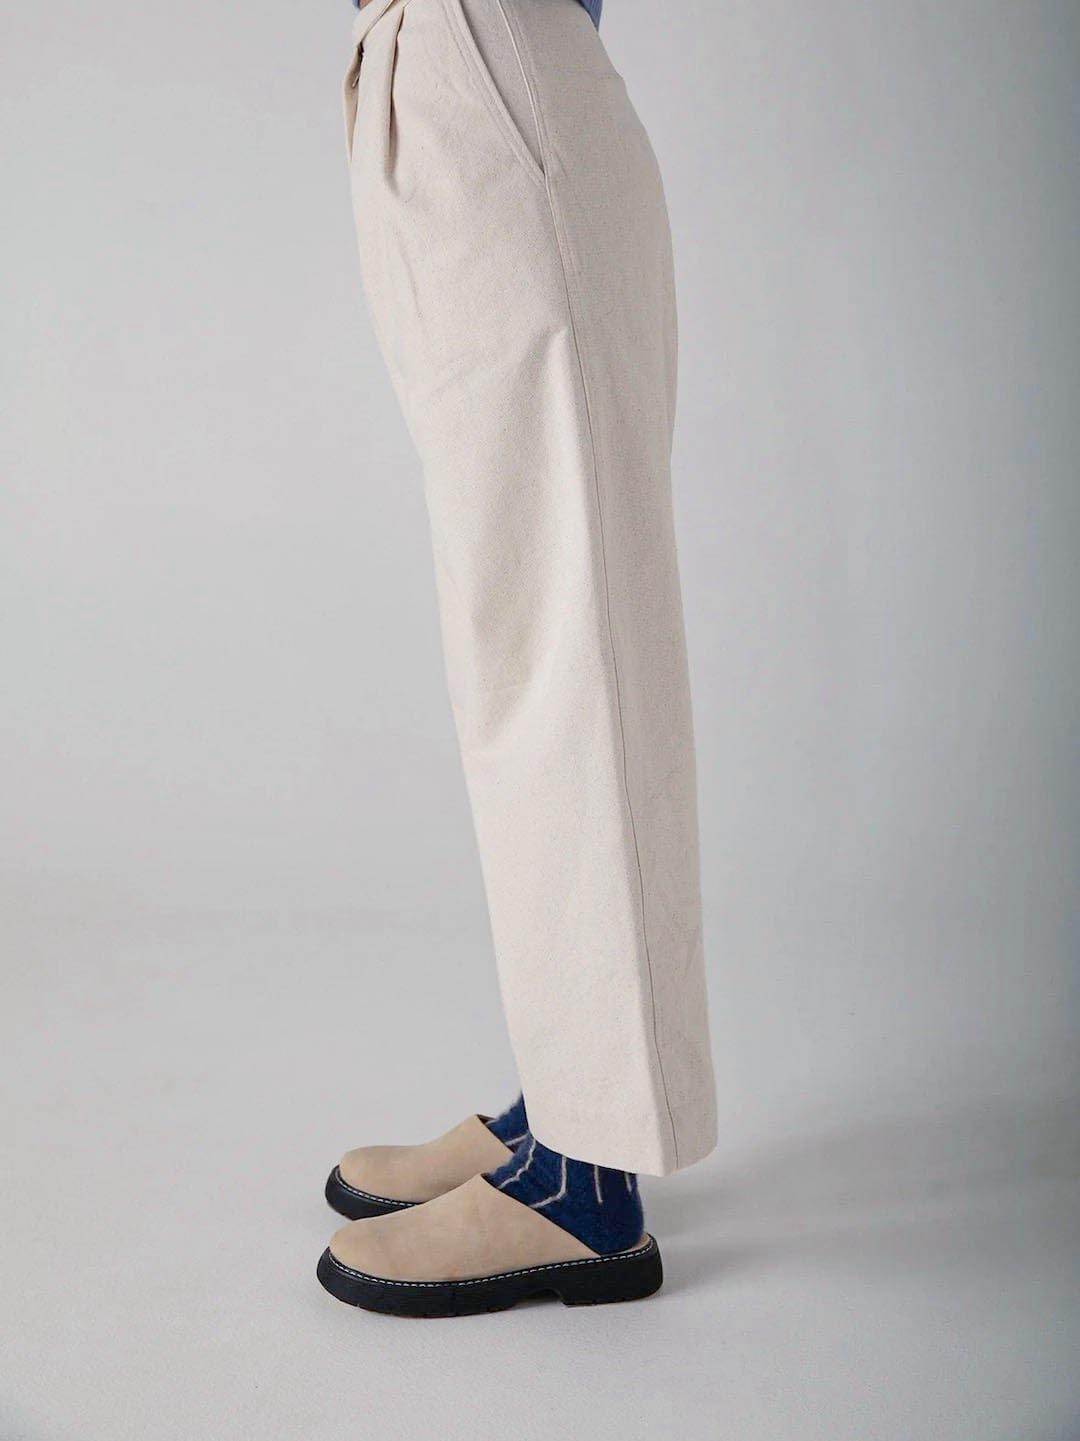 A person standing in a neutral pose showcasing soft, light-colored trousers and Francie dark blue espadrilles against a plain background.